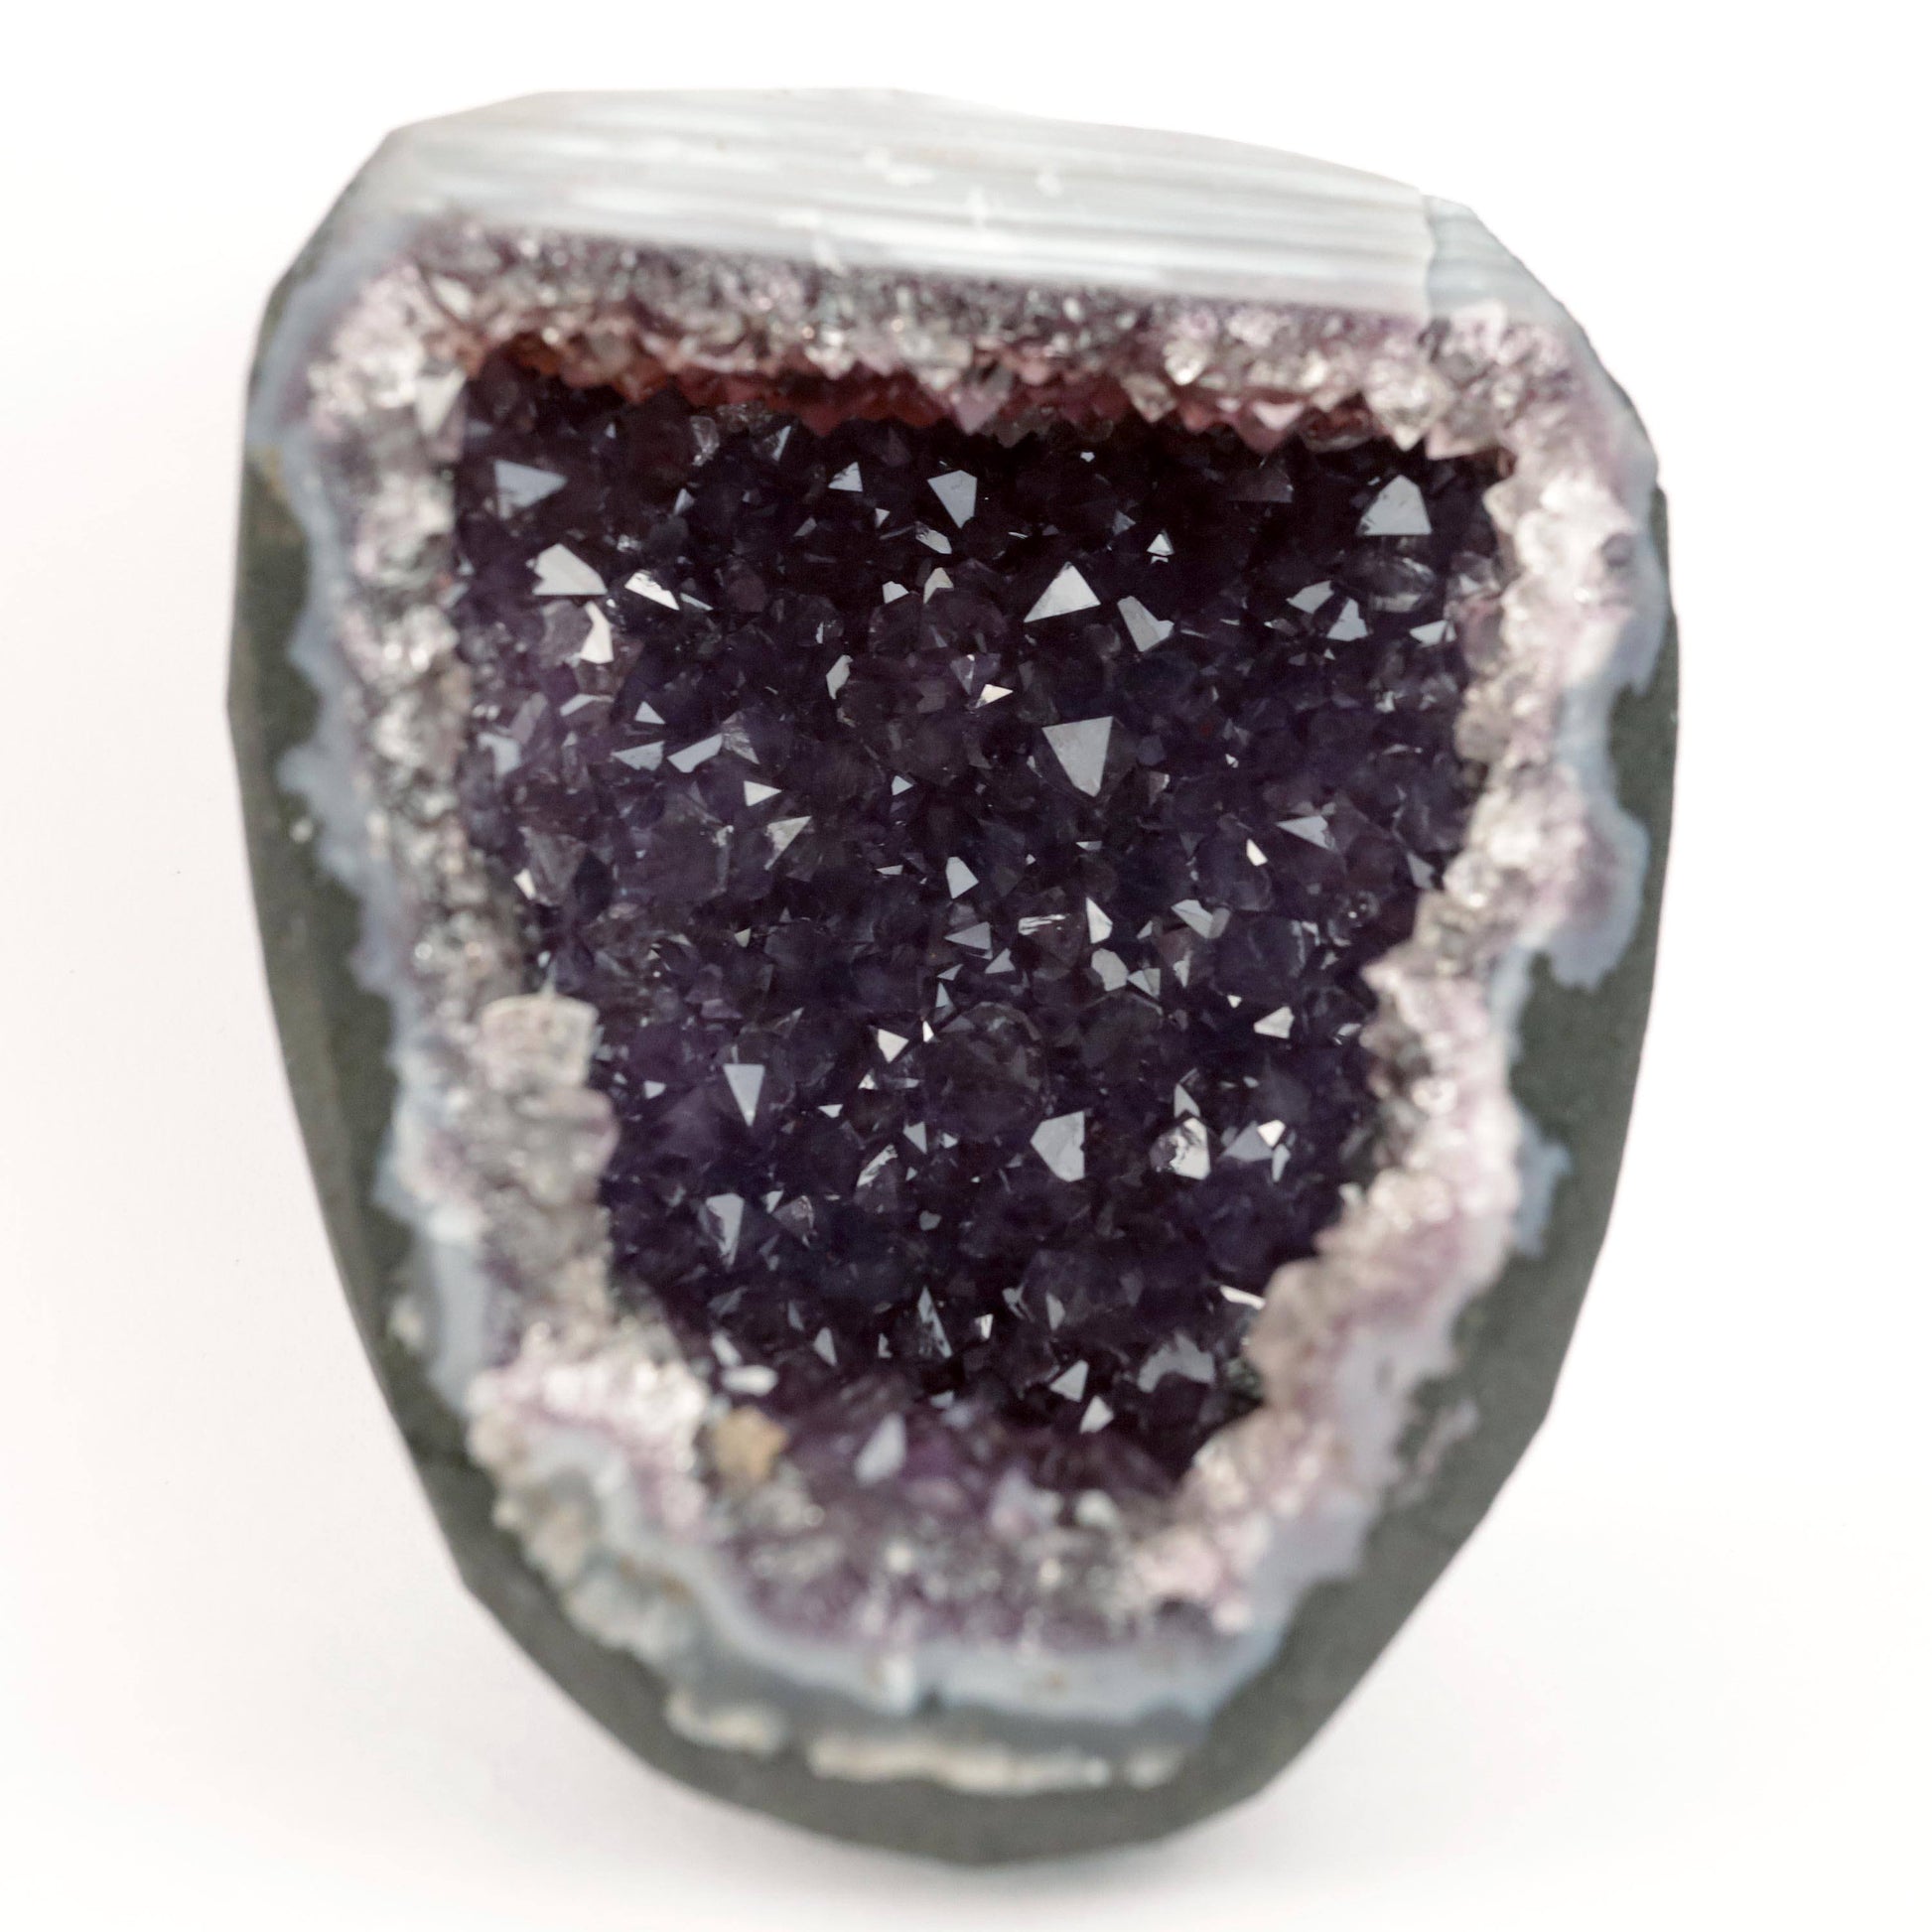 Sparkling Purple Amethyst Geode Natural Mineral Specimen # B 4636  https://www.superbminerals.us/products/sparkling-purple-amethyst-geode-natural-mineral-specimen-b-4636  Features: Large Amethyst Cluster with rich purple gems. Stunning Amethyst has a vibrant, rich hue and a brilliant sparkle. Besides its colour and brilliance, I chose this piece for its unusual and asymmetrical form. In a sea of identical-looking geodes, it stood out. I would recommend this as a decorative item. 